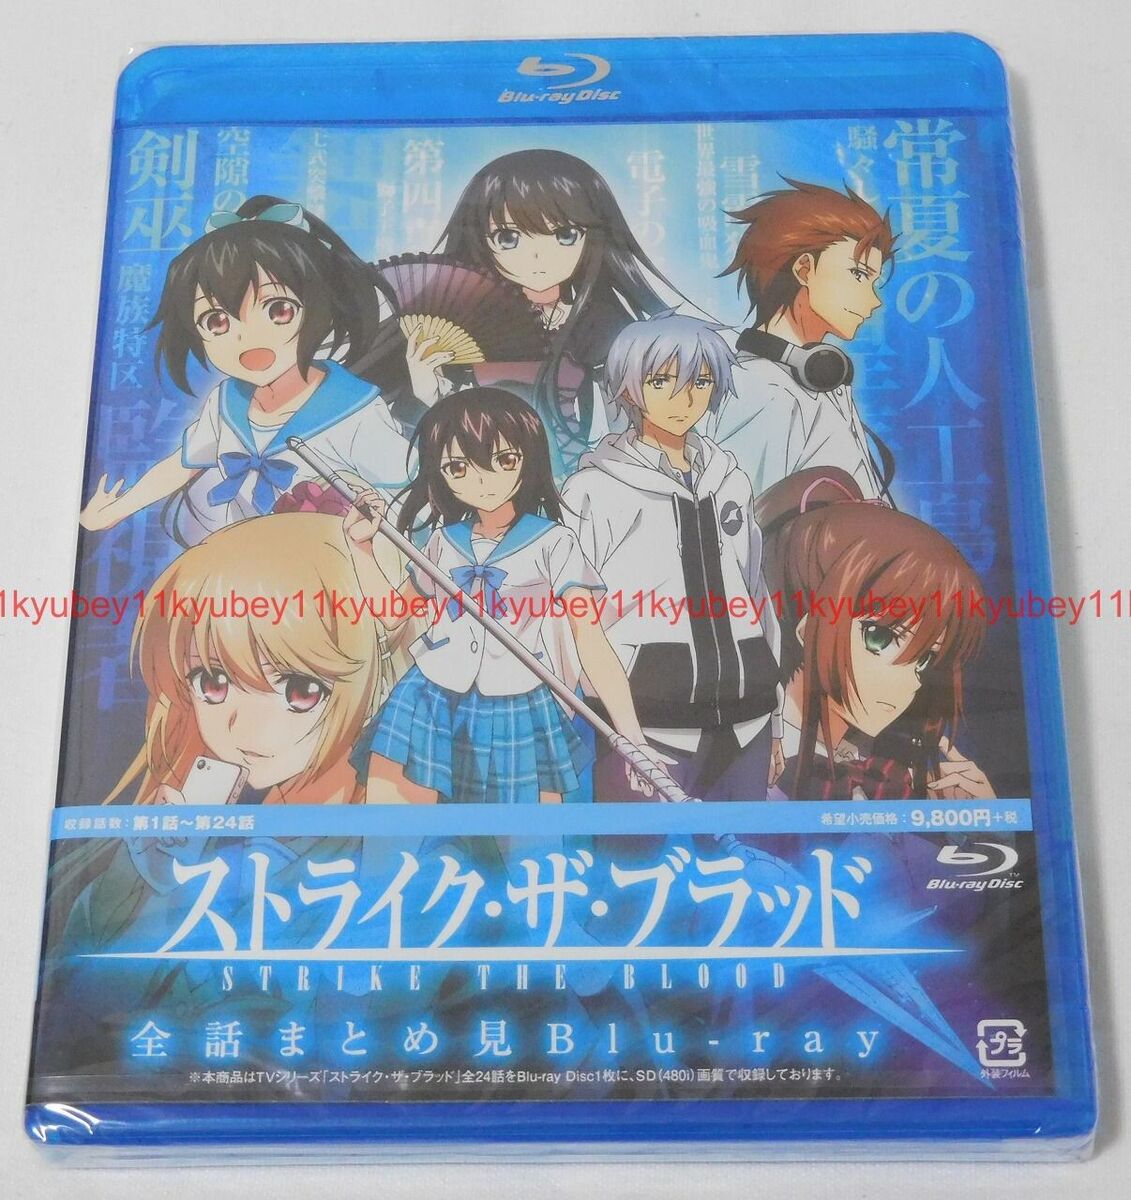 courtney kupfer recommends Strike The Blood Episode 1